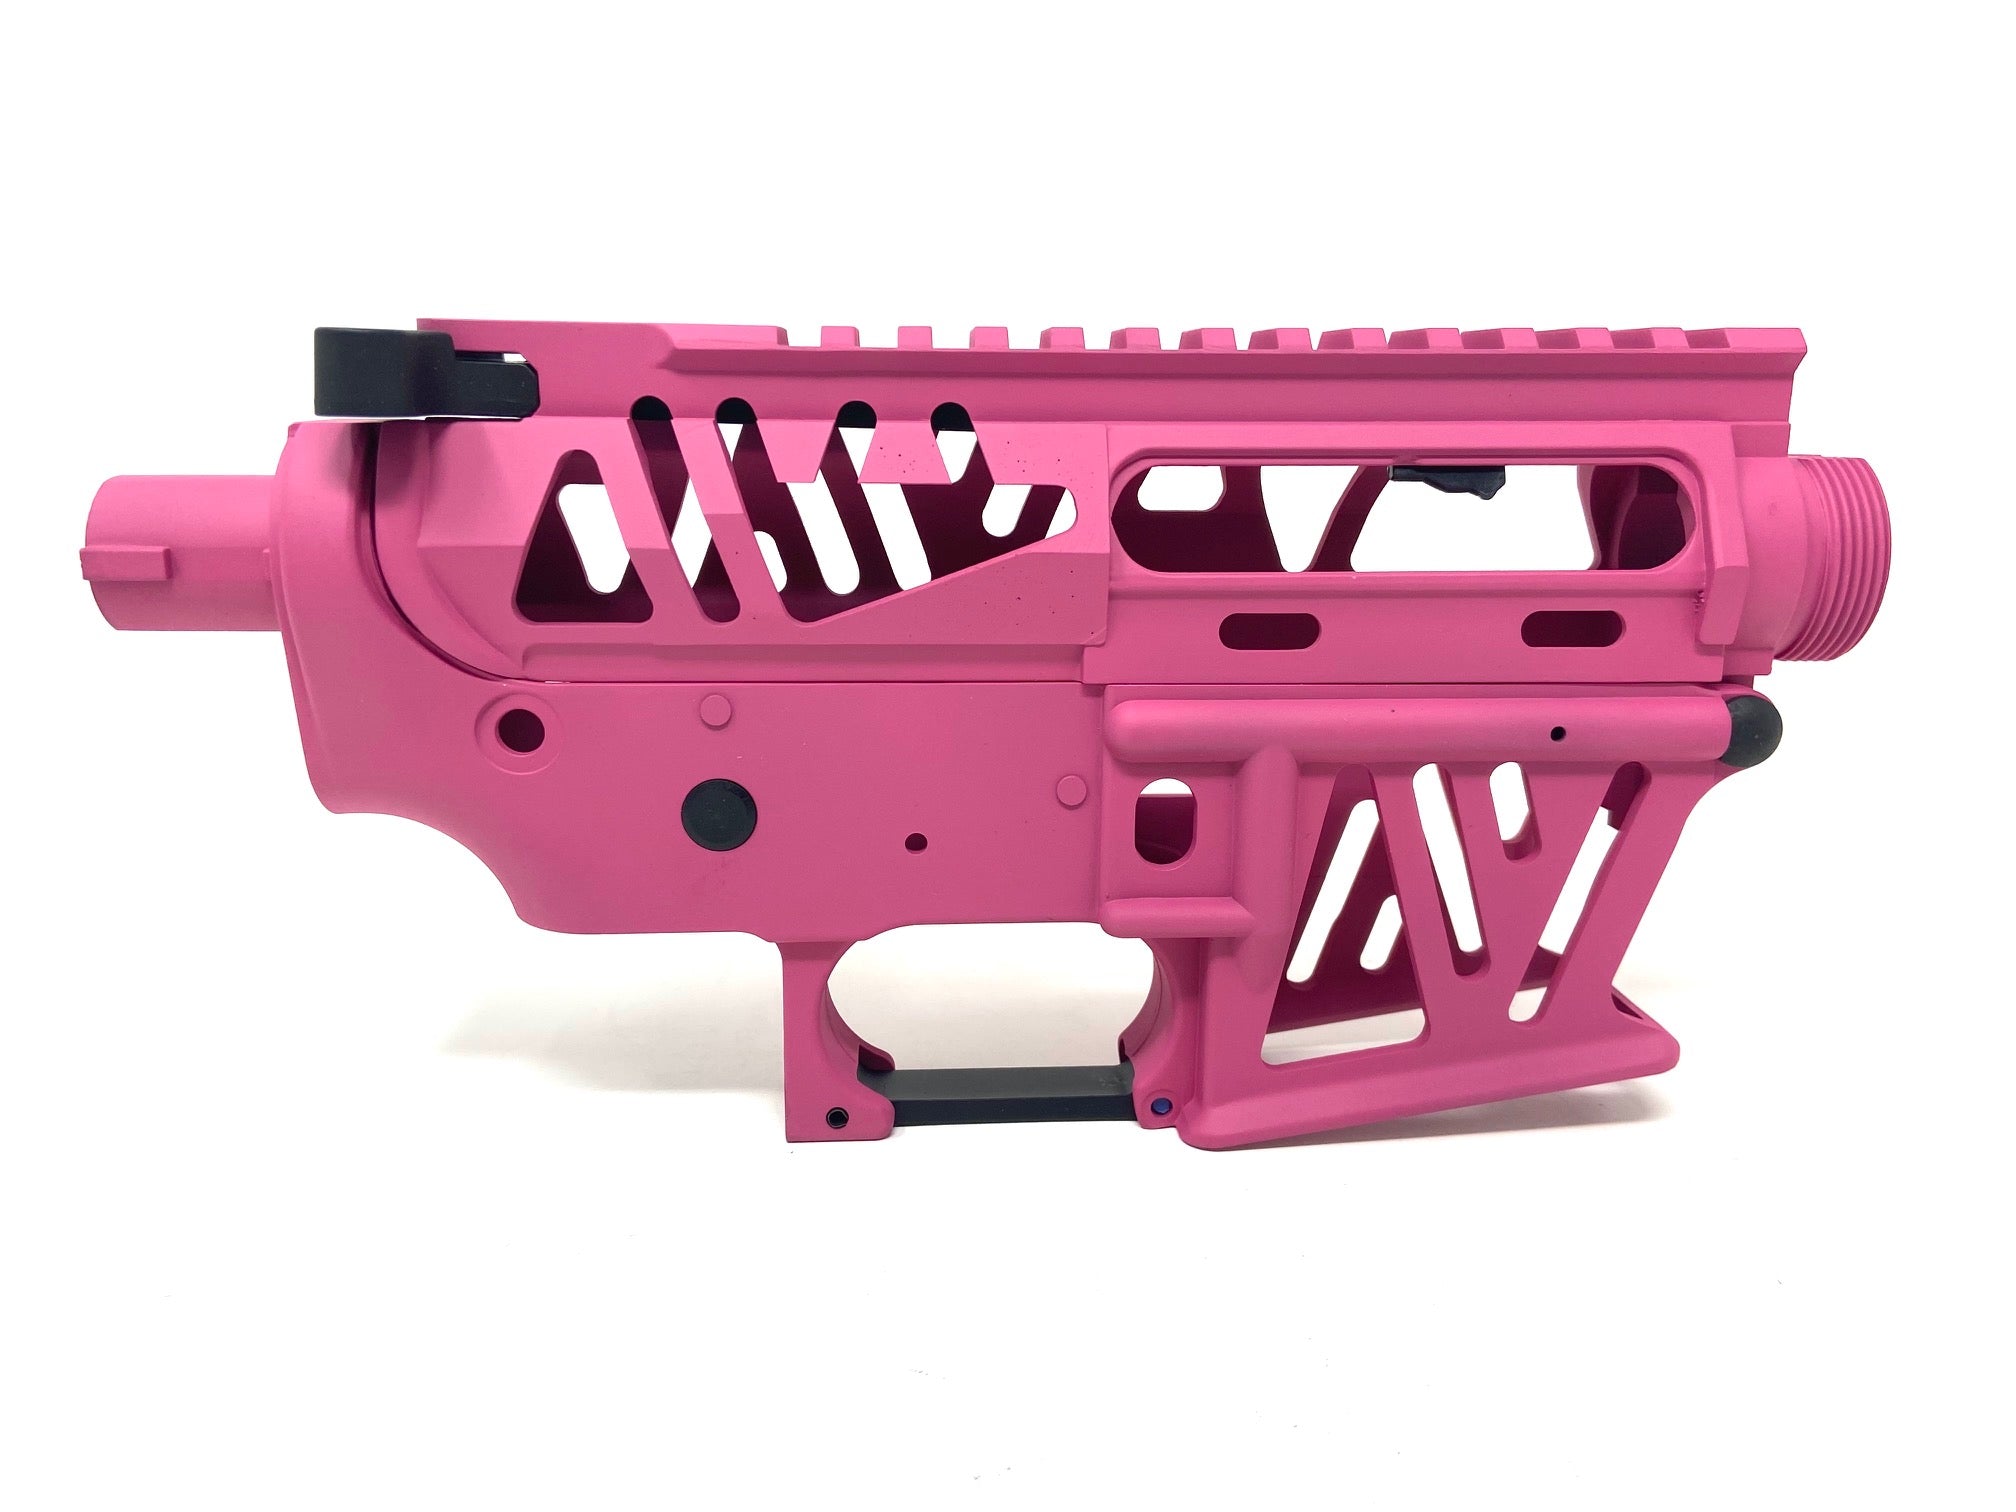 Custom M4 receiver by MAC Customs!  Available at SS Airsoft! Build your dream gun with these awesome bodies.  Includes small parts.  Fits most gearboxes.